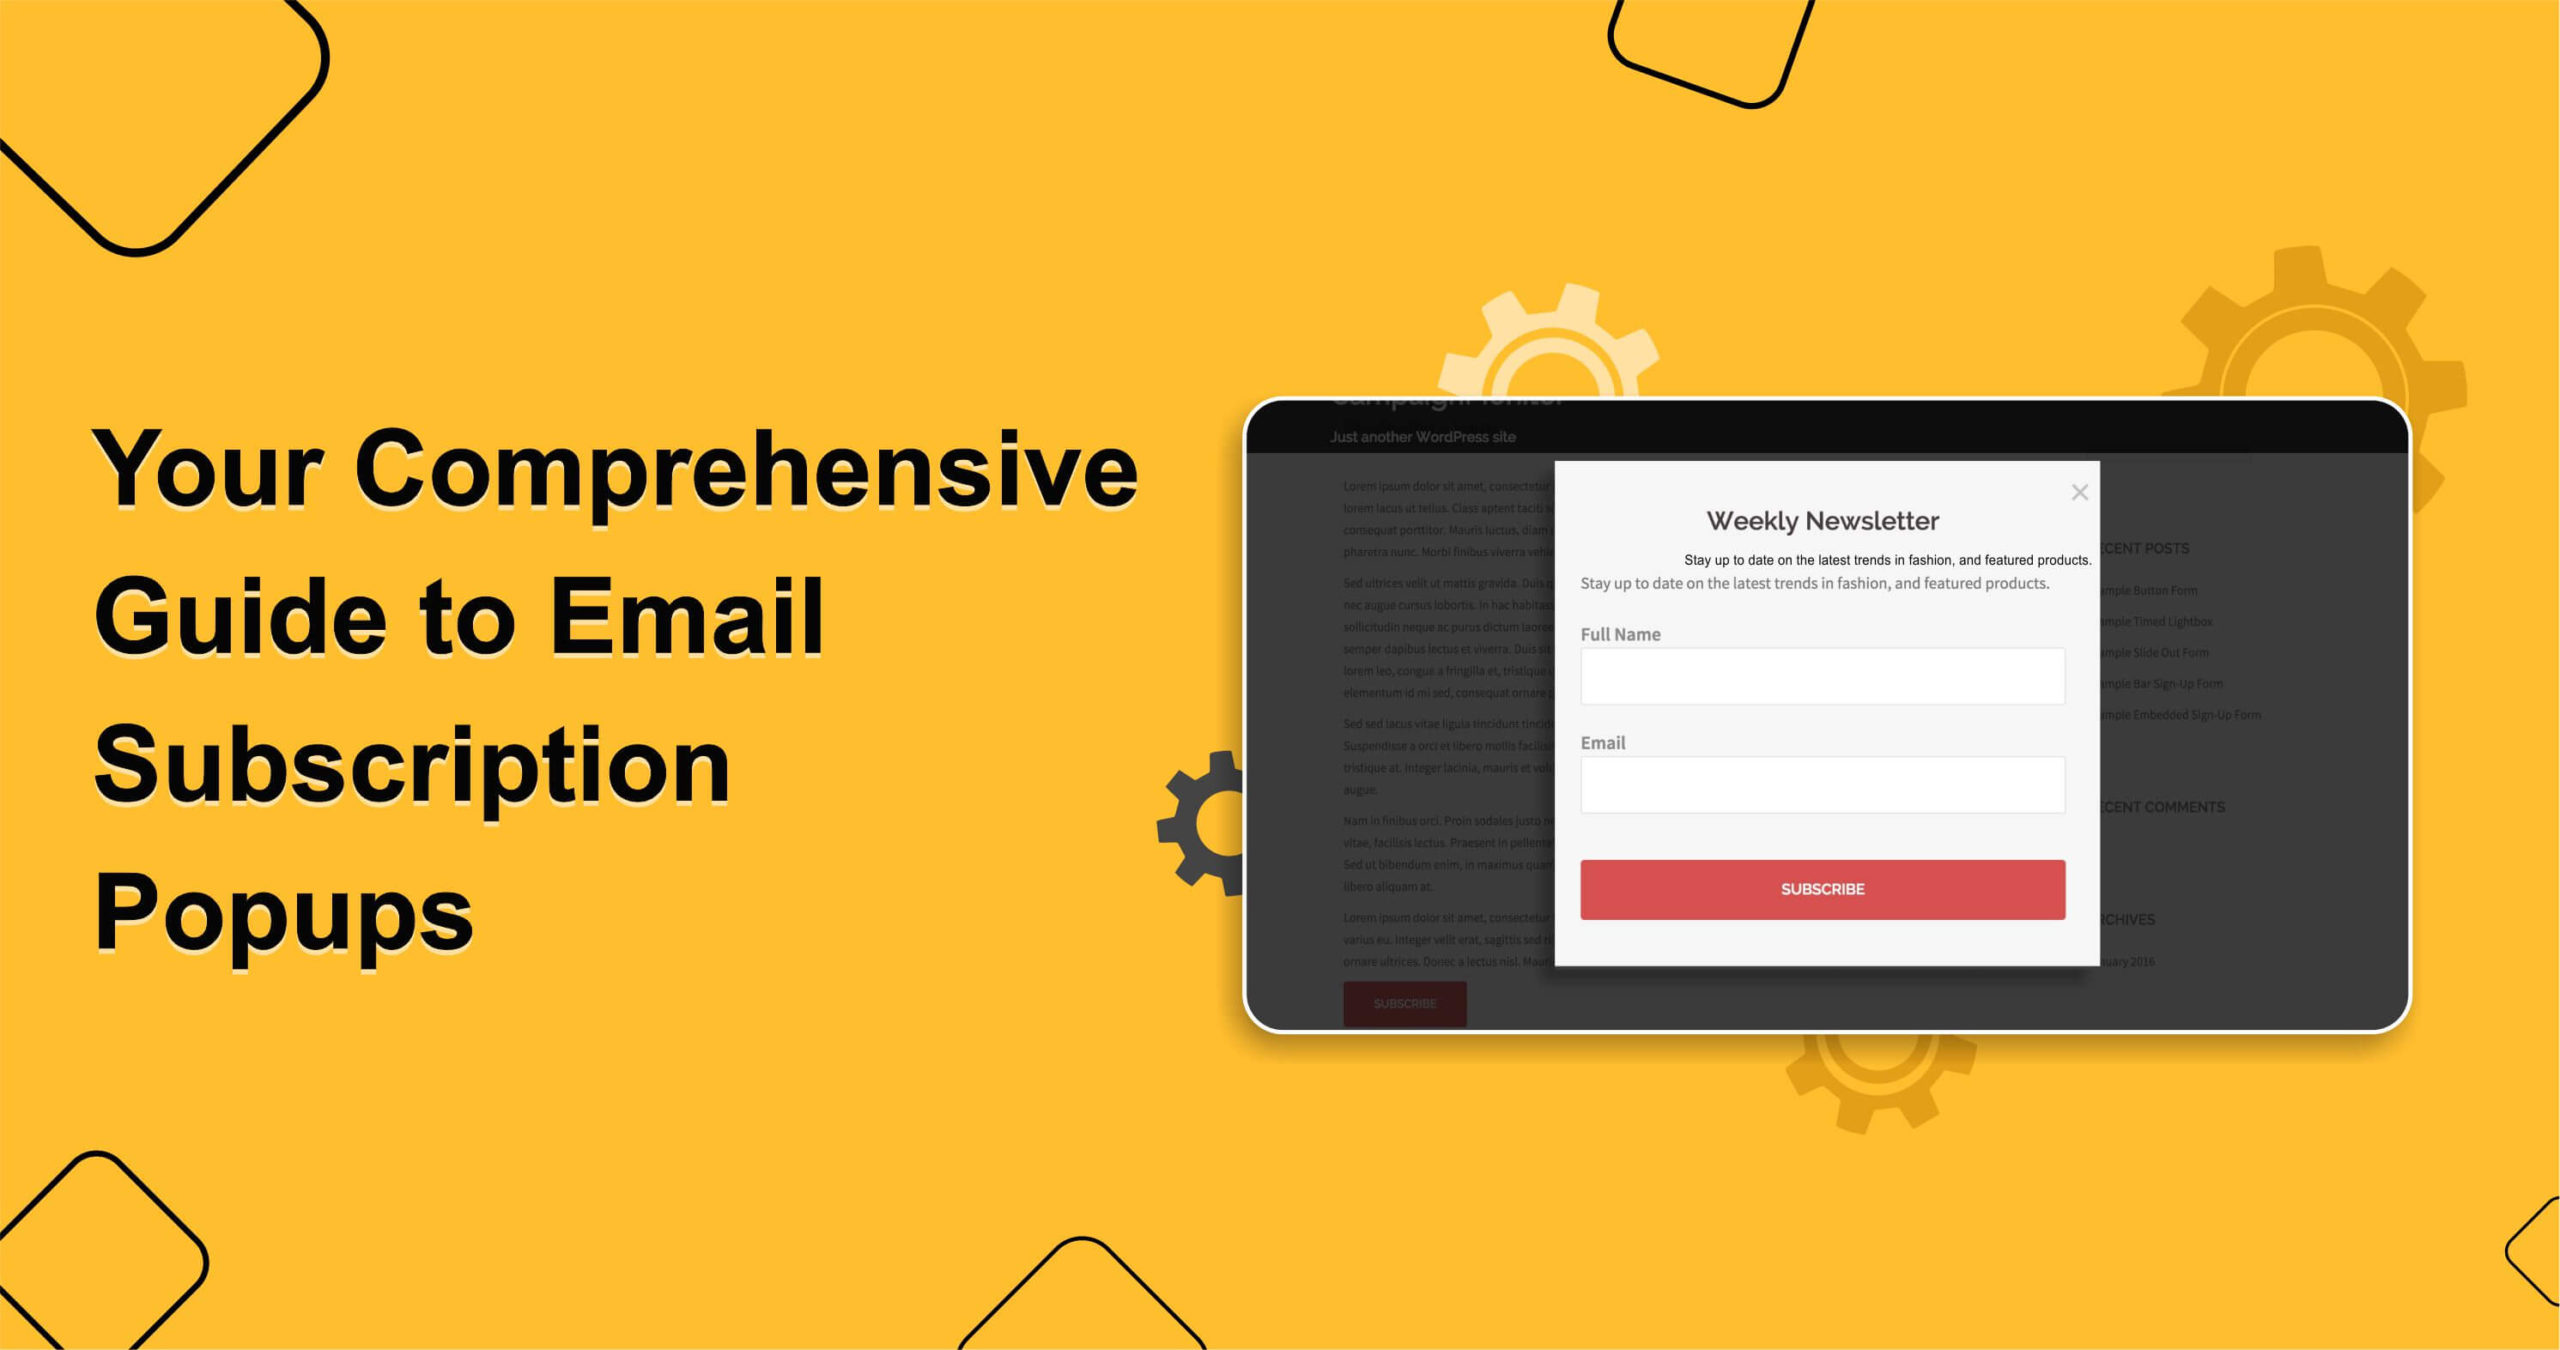 Your Comprehensive Guide to Email Subscription Popups